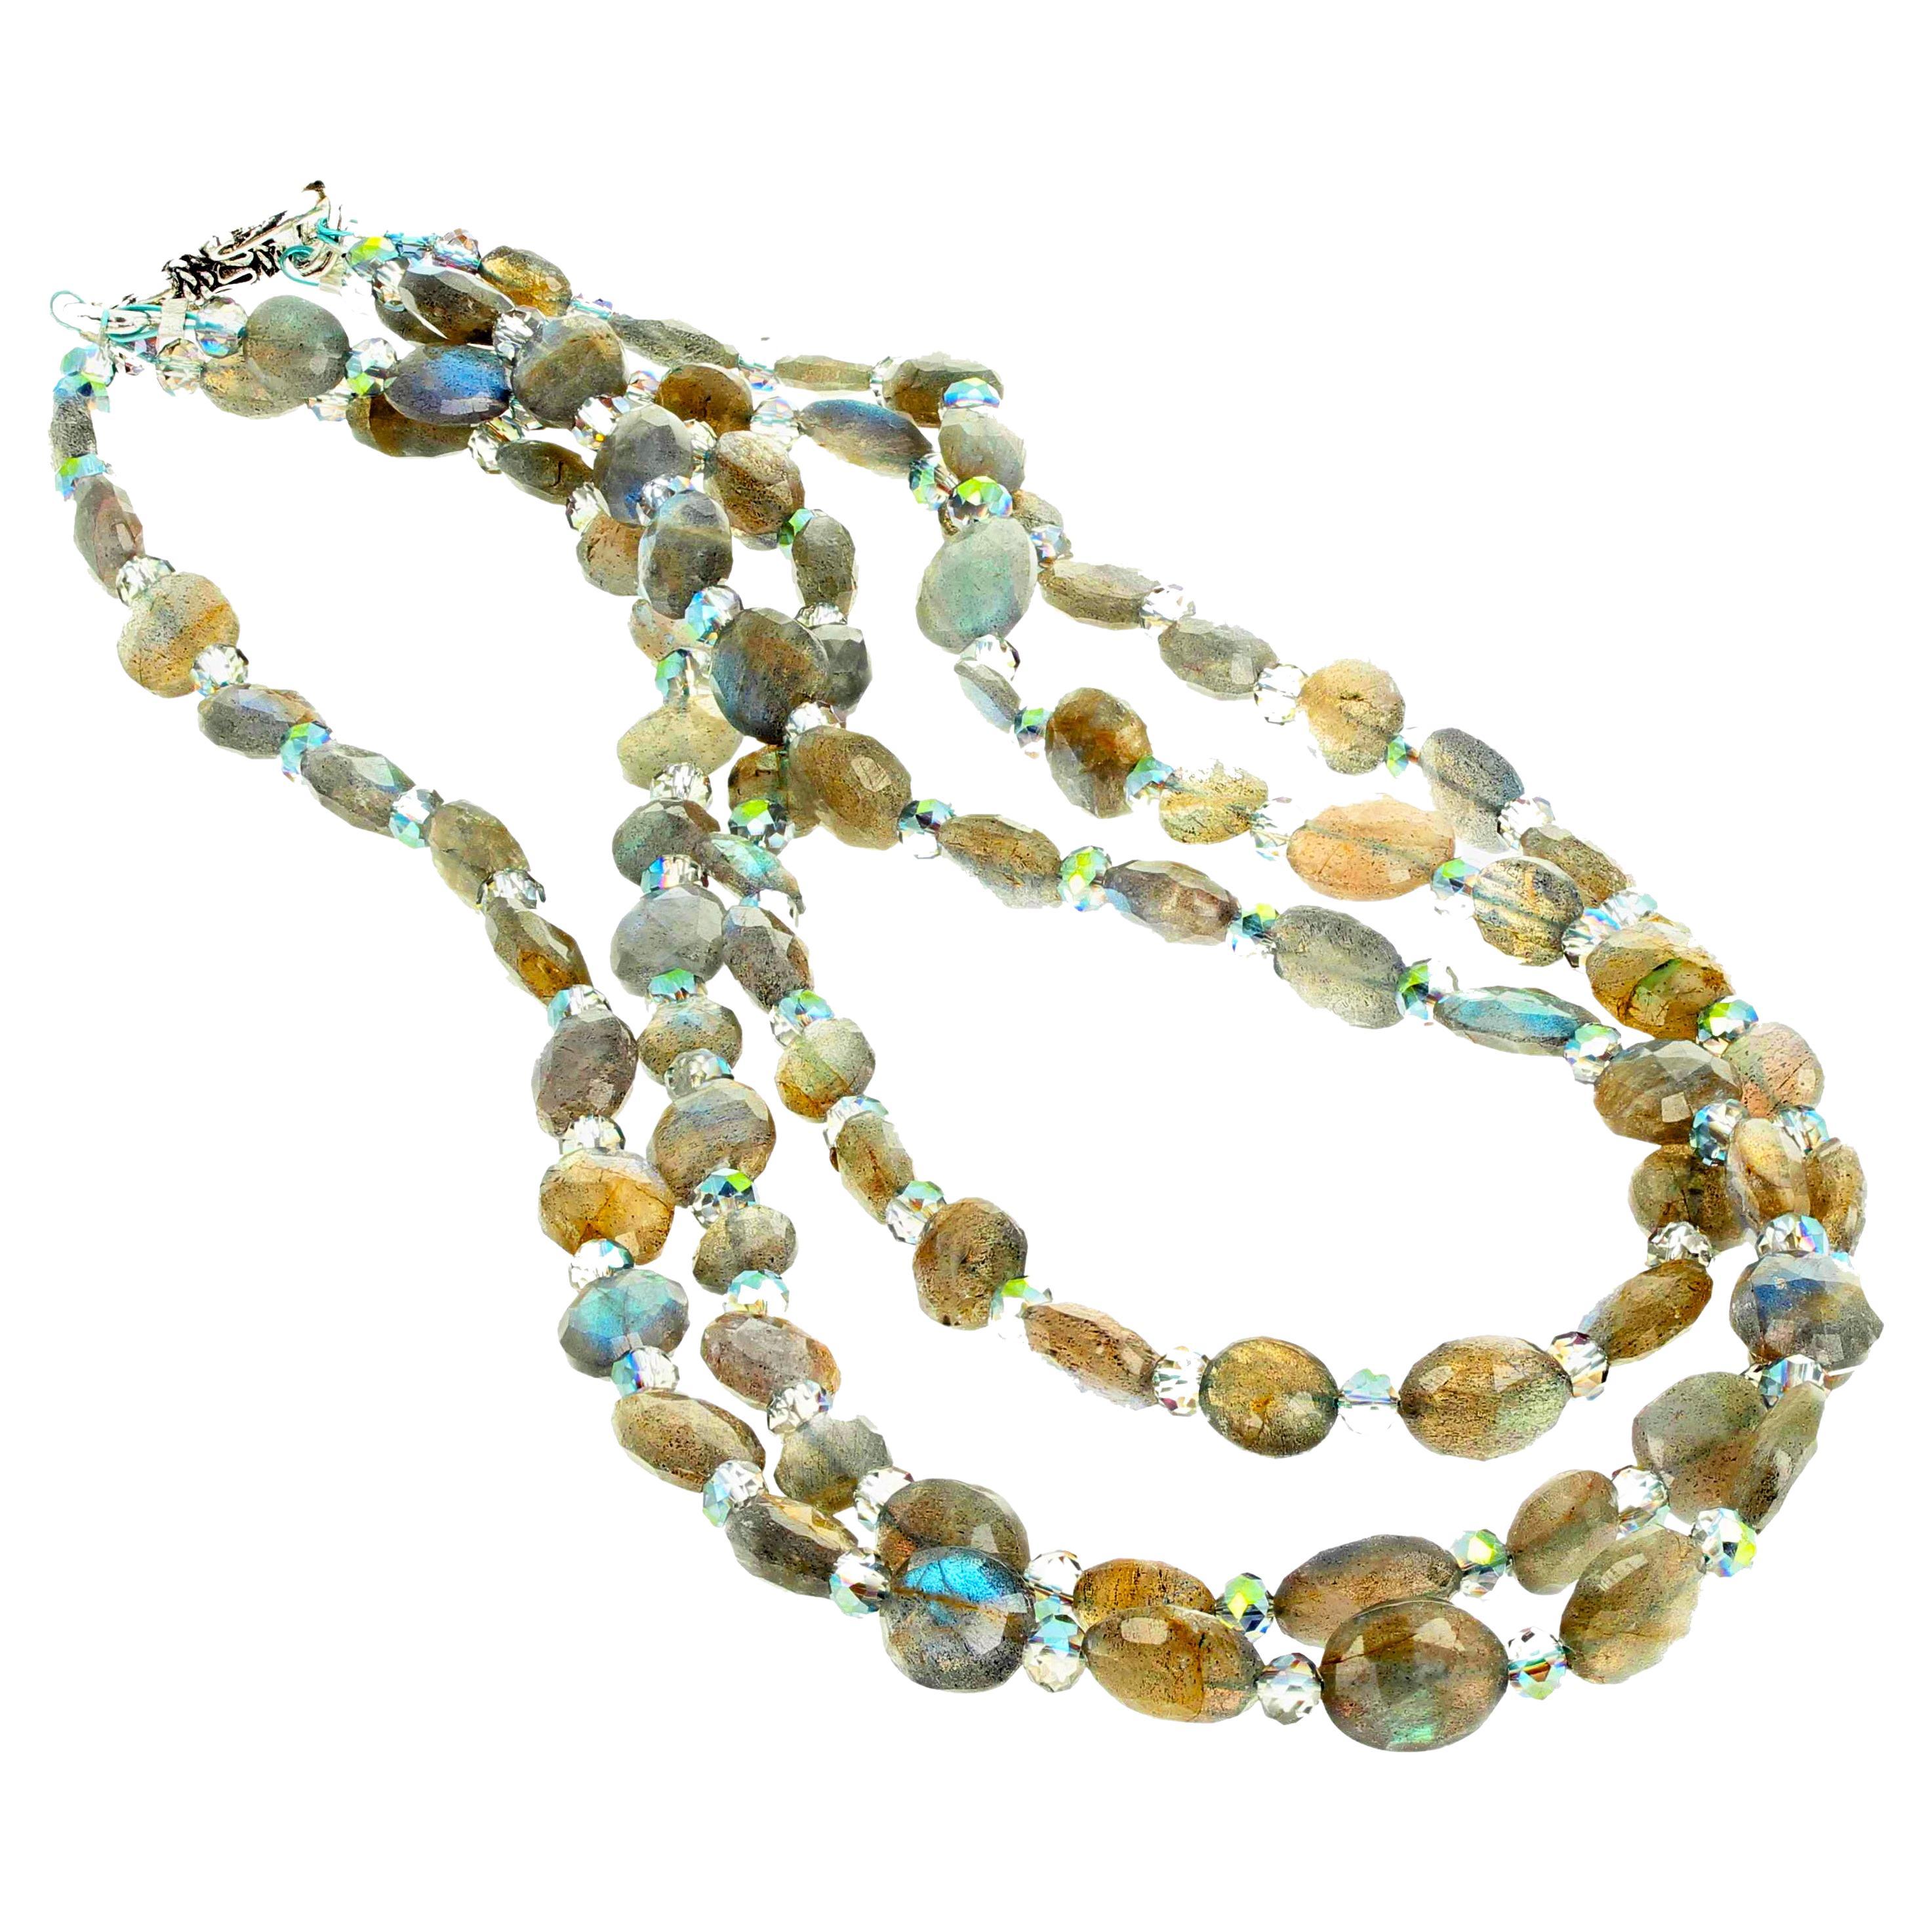 This glittering natural checkerboard gem cut polished Brazilian Labradorite tripple strand necklace is 15.5 inches long with a silver hook.  The average Labradorite is approximately 10 mm x 8 mm.  The gemstones glisten and glitter reflecting all